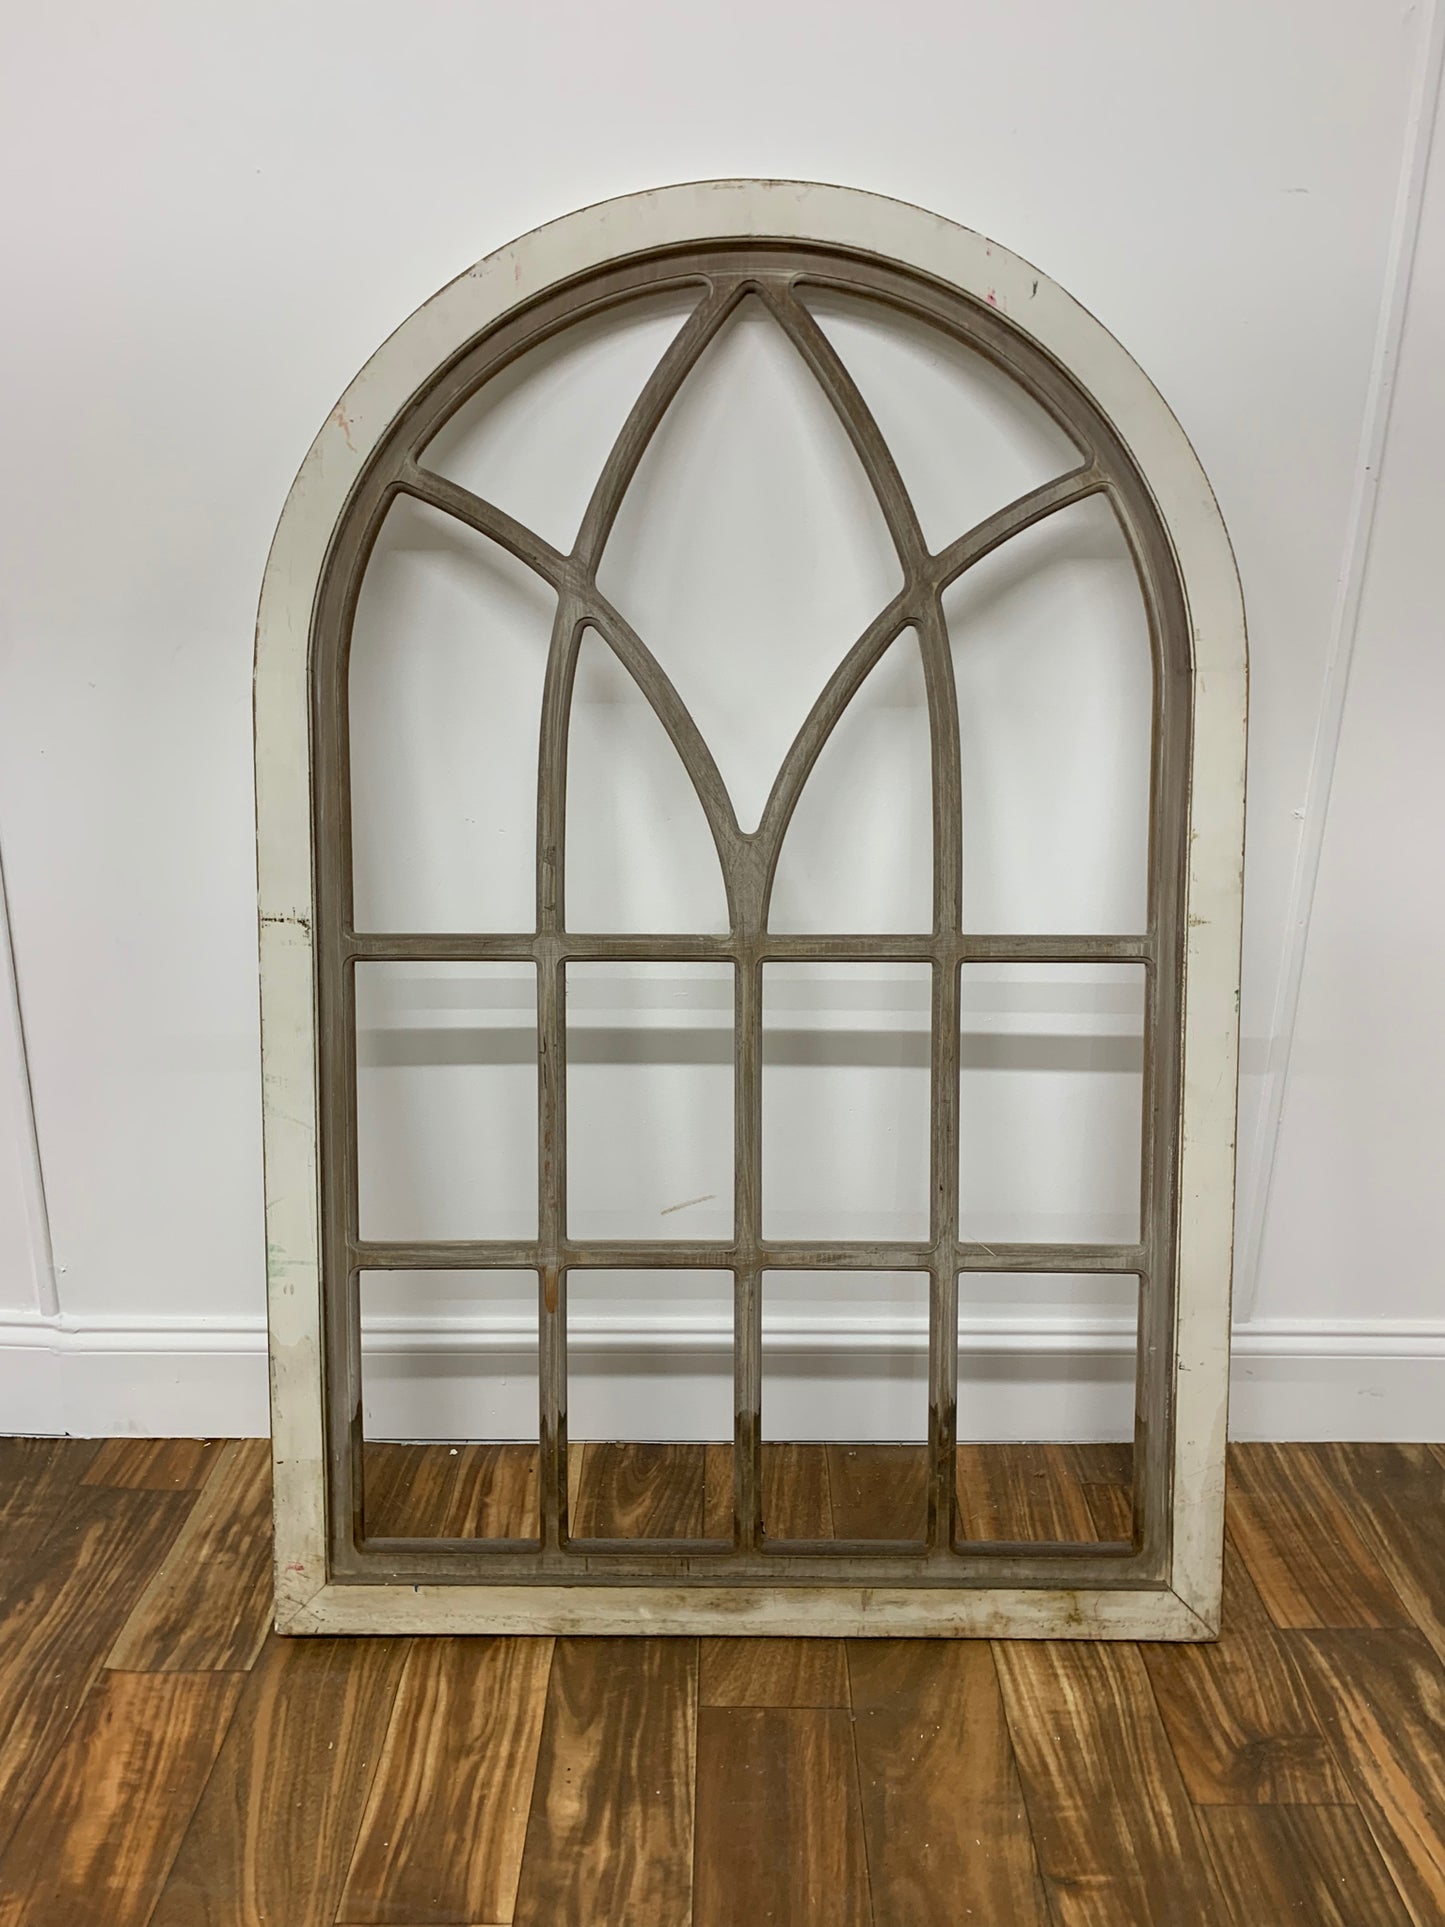 ARCHED WINDOW